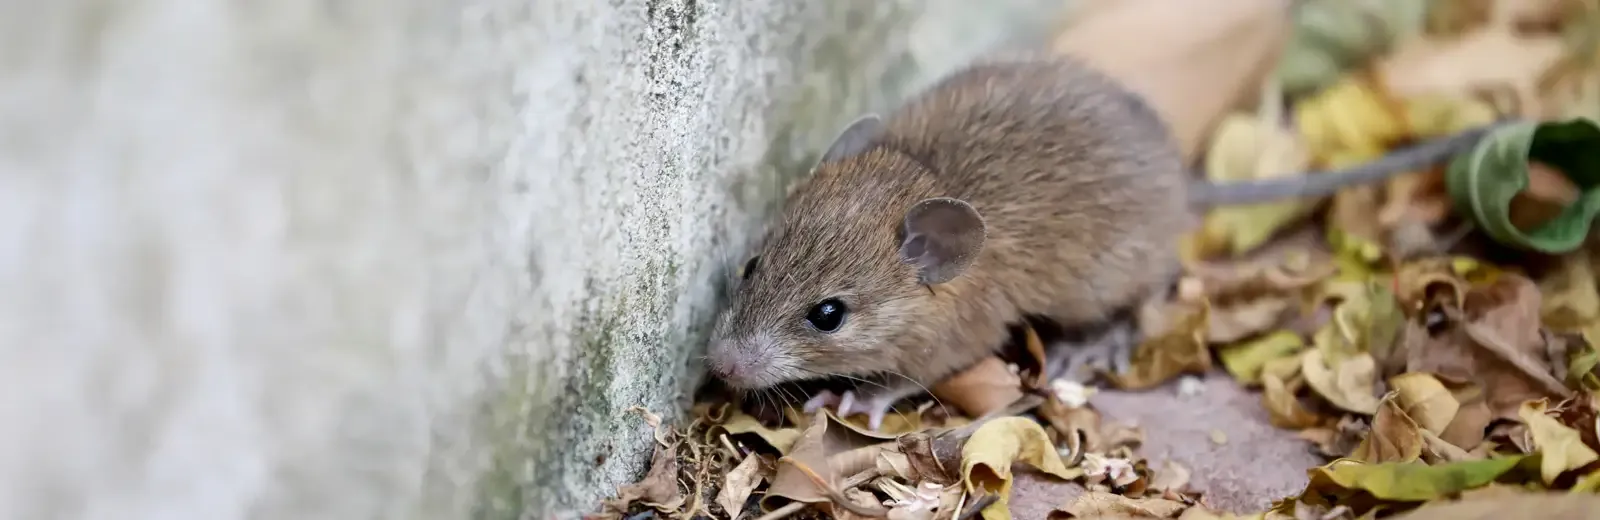 Mouse next to a house